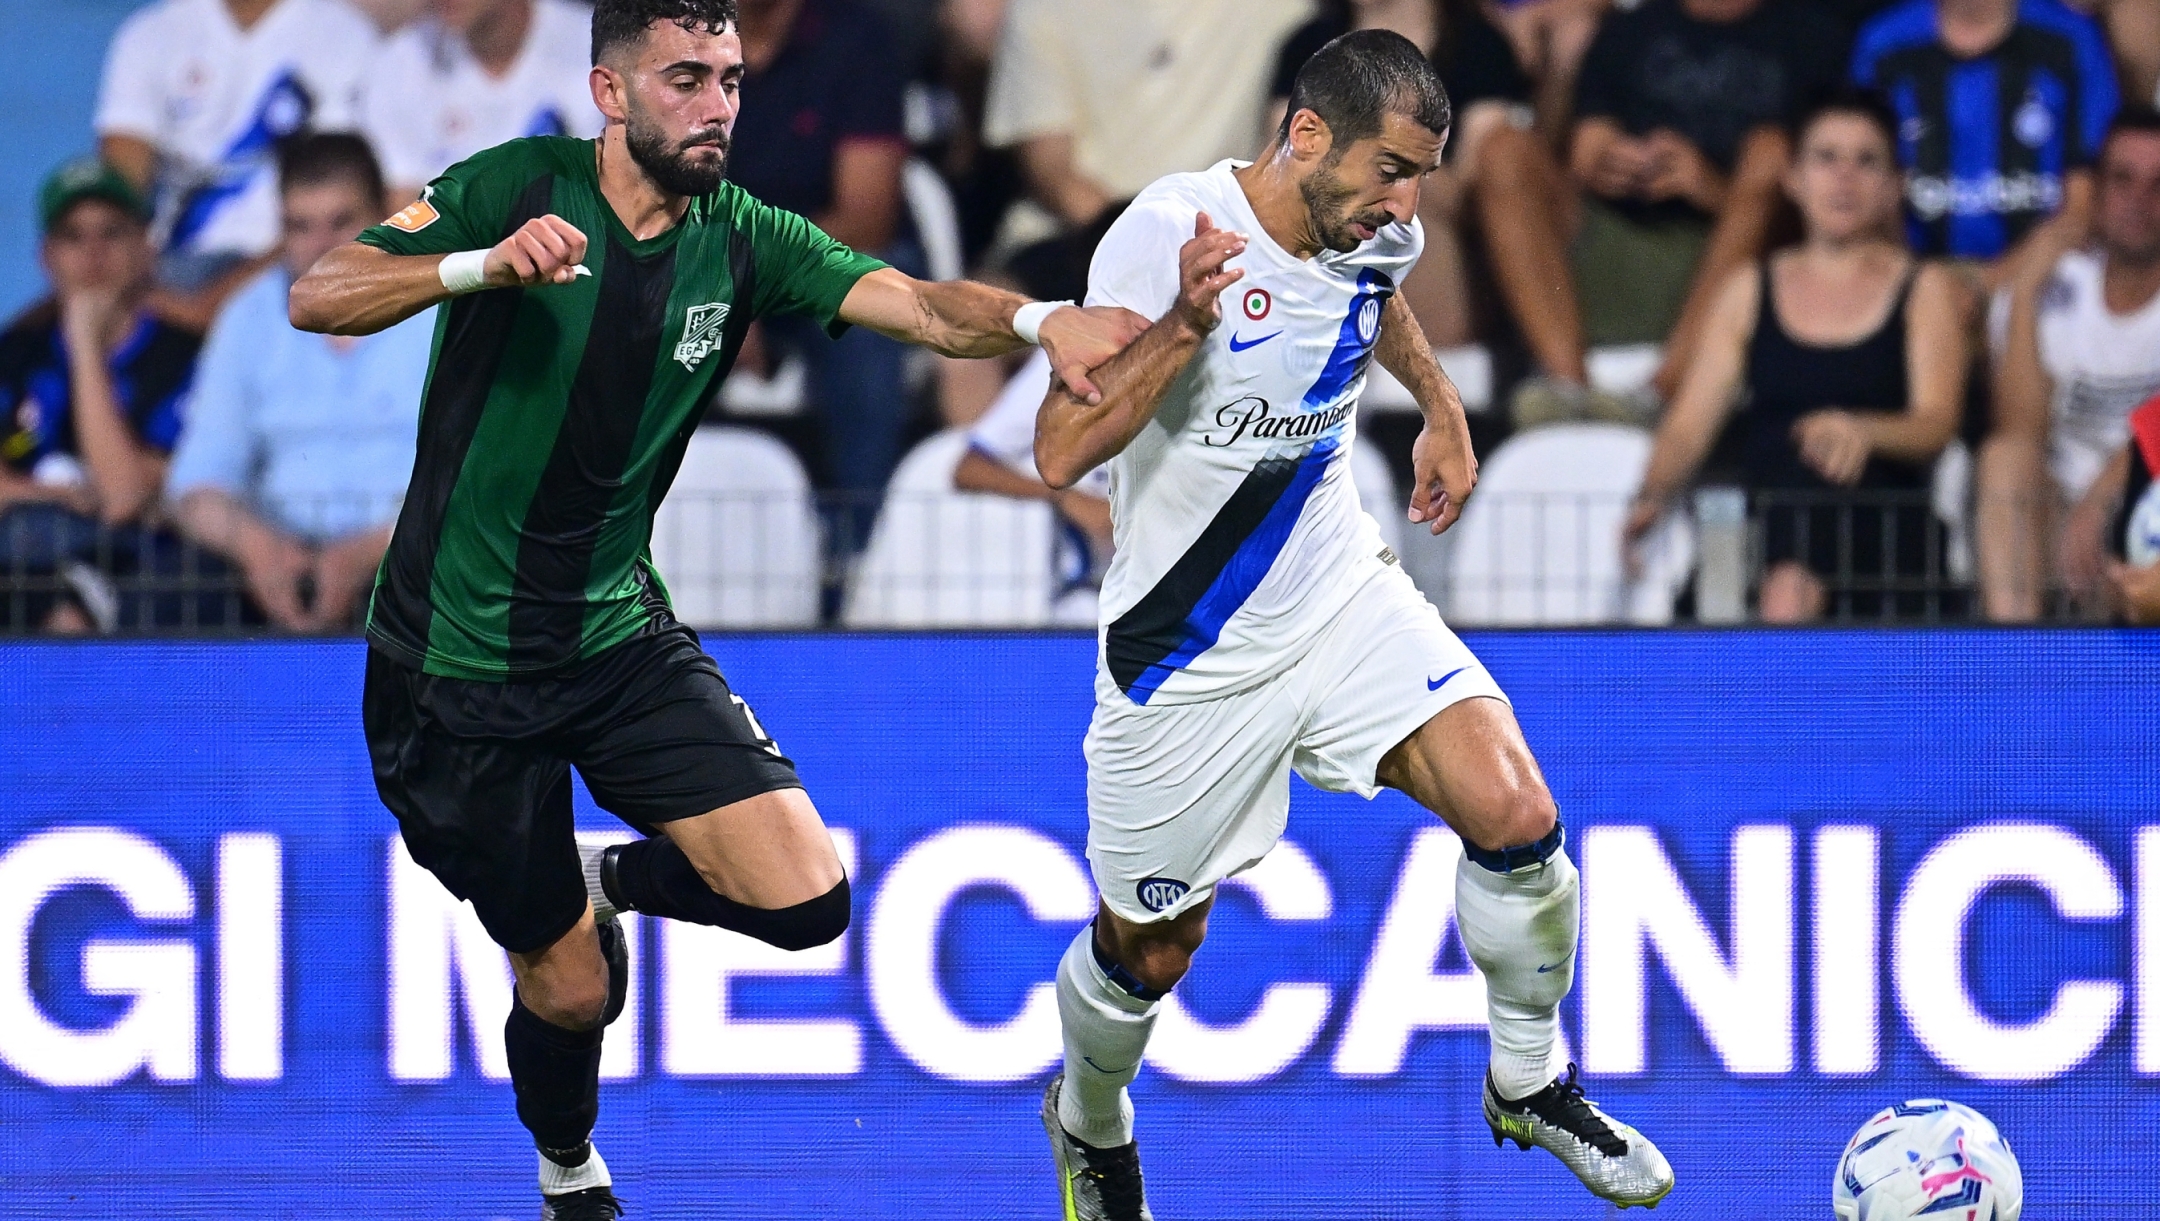 FERRARA, ITALY - AUGUST 13:  Henrikh Mkhitaryan of FC Internazionale in action during the Pre- Season Friendly match between FC Internazionale and KF Egnatia at Stadio Paolo Mazza on August 13, 2023 in Ferrara, Italy. (Photo by Mattia Ozbot - Inter/Inter via Getty Images)